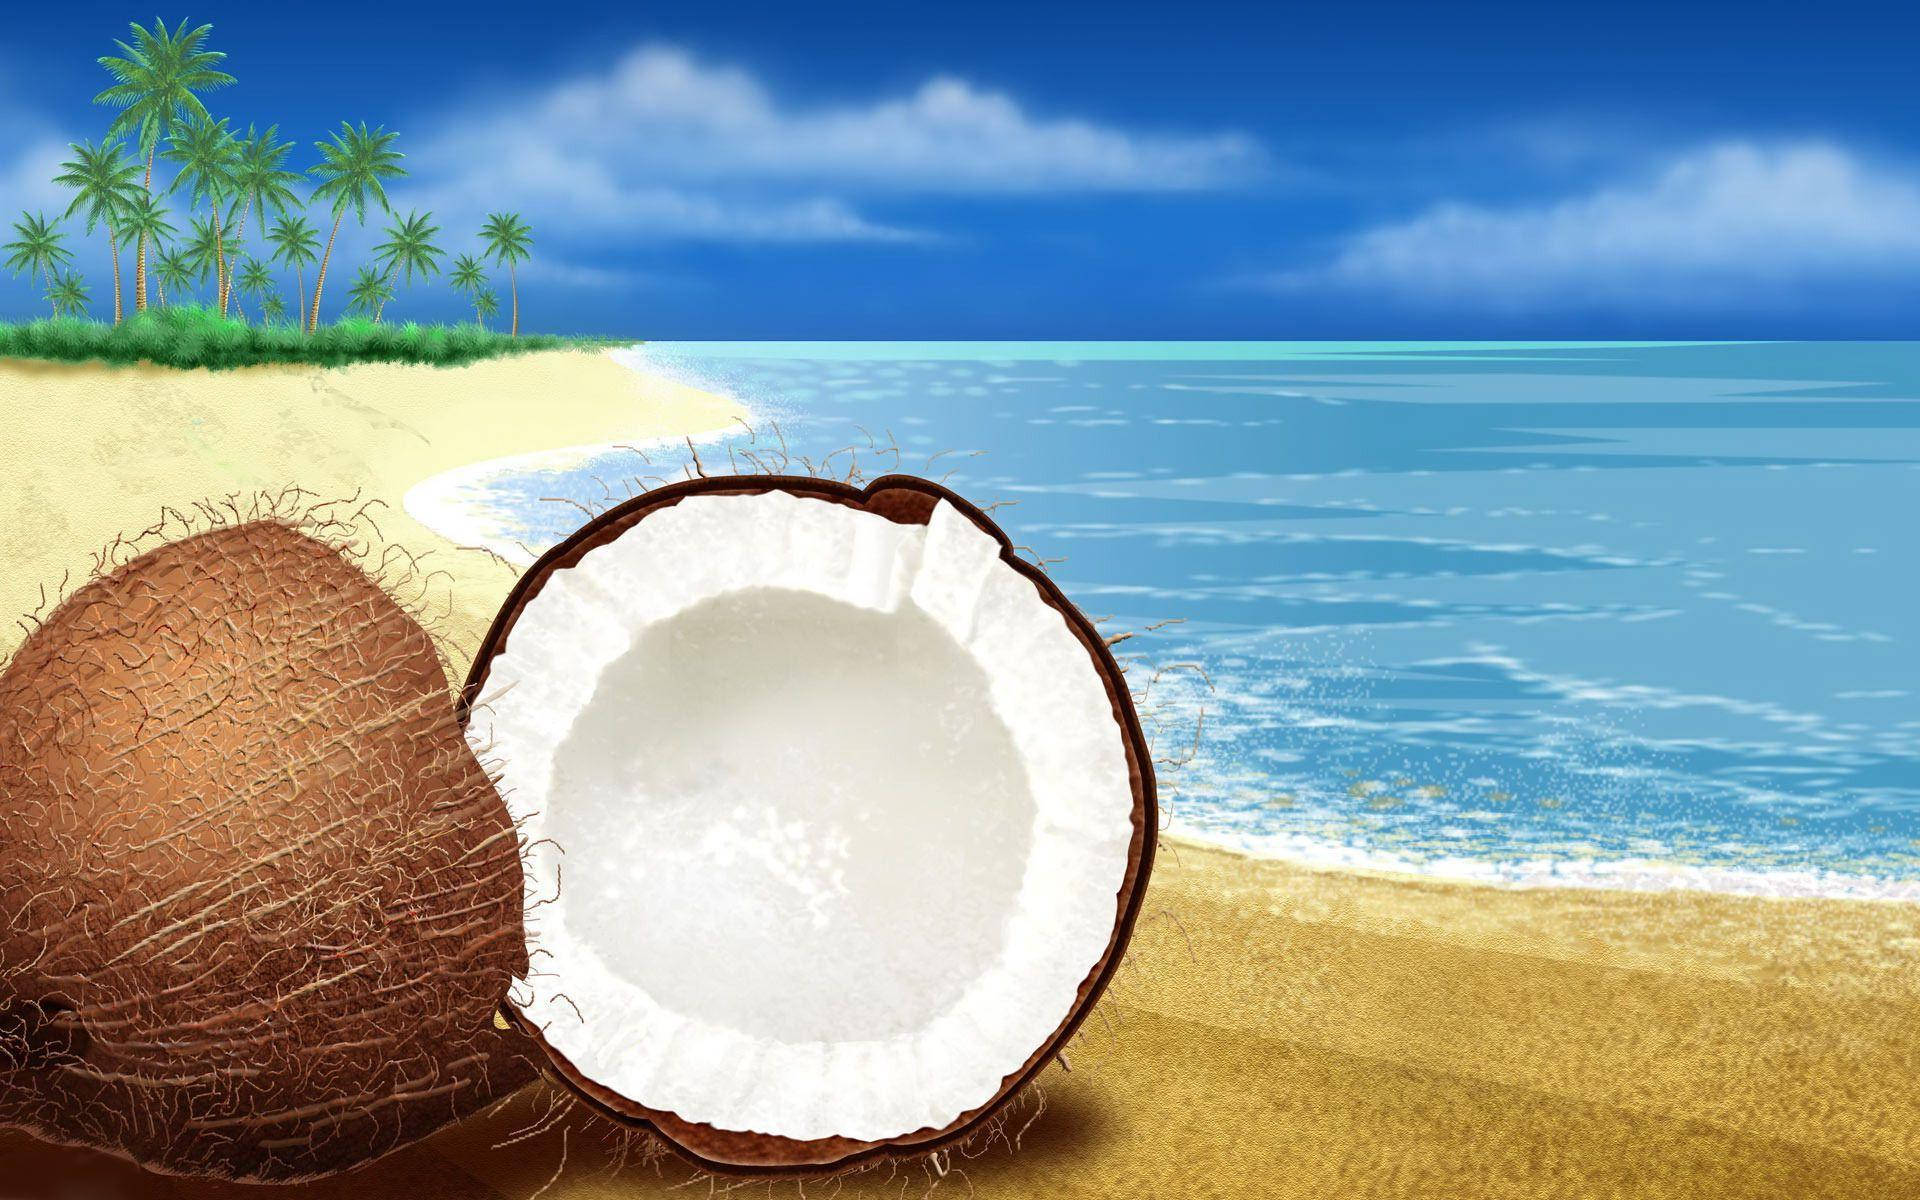 Coconut Fruit On A Beach Painting Wallpaper